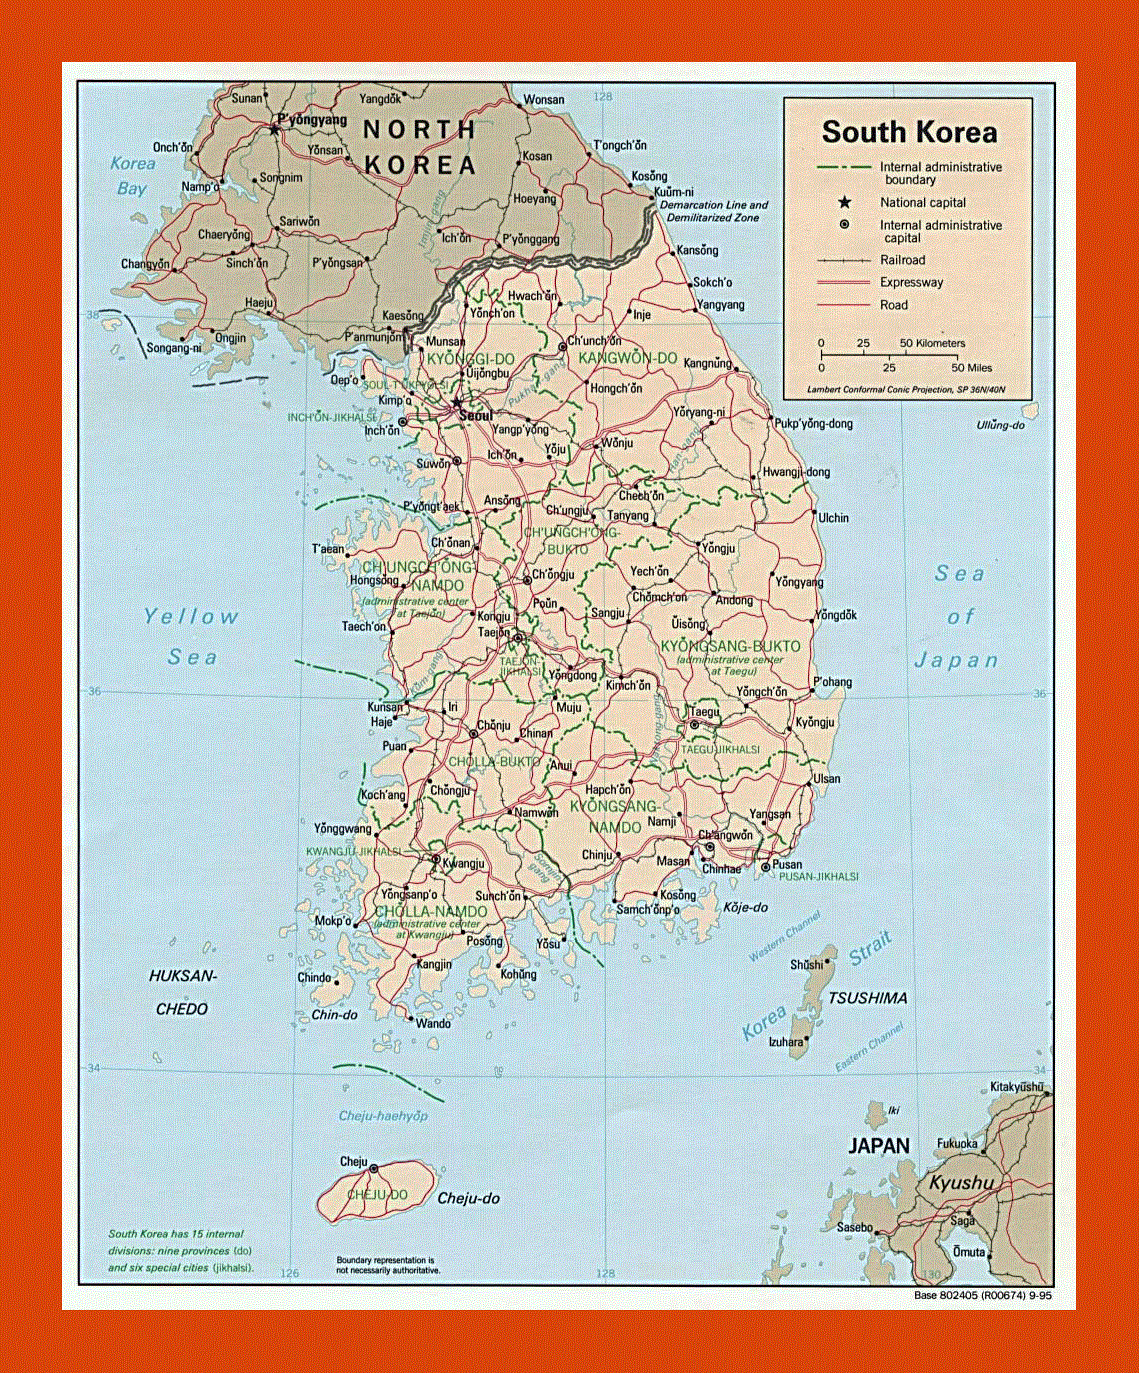 Political and administrative map of South Korea - 1995 | Maps of South ...